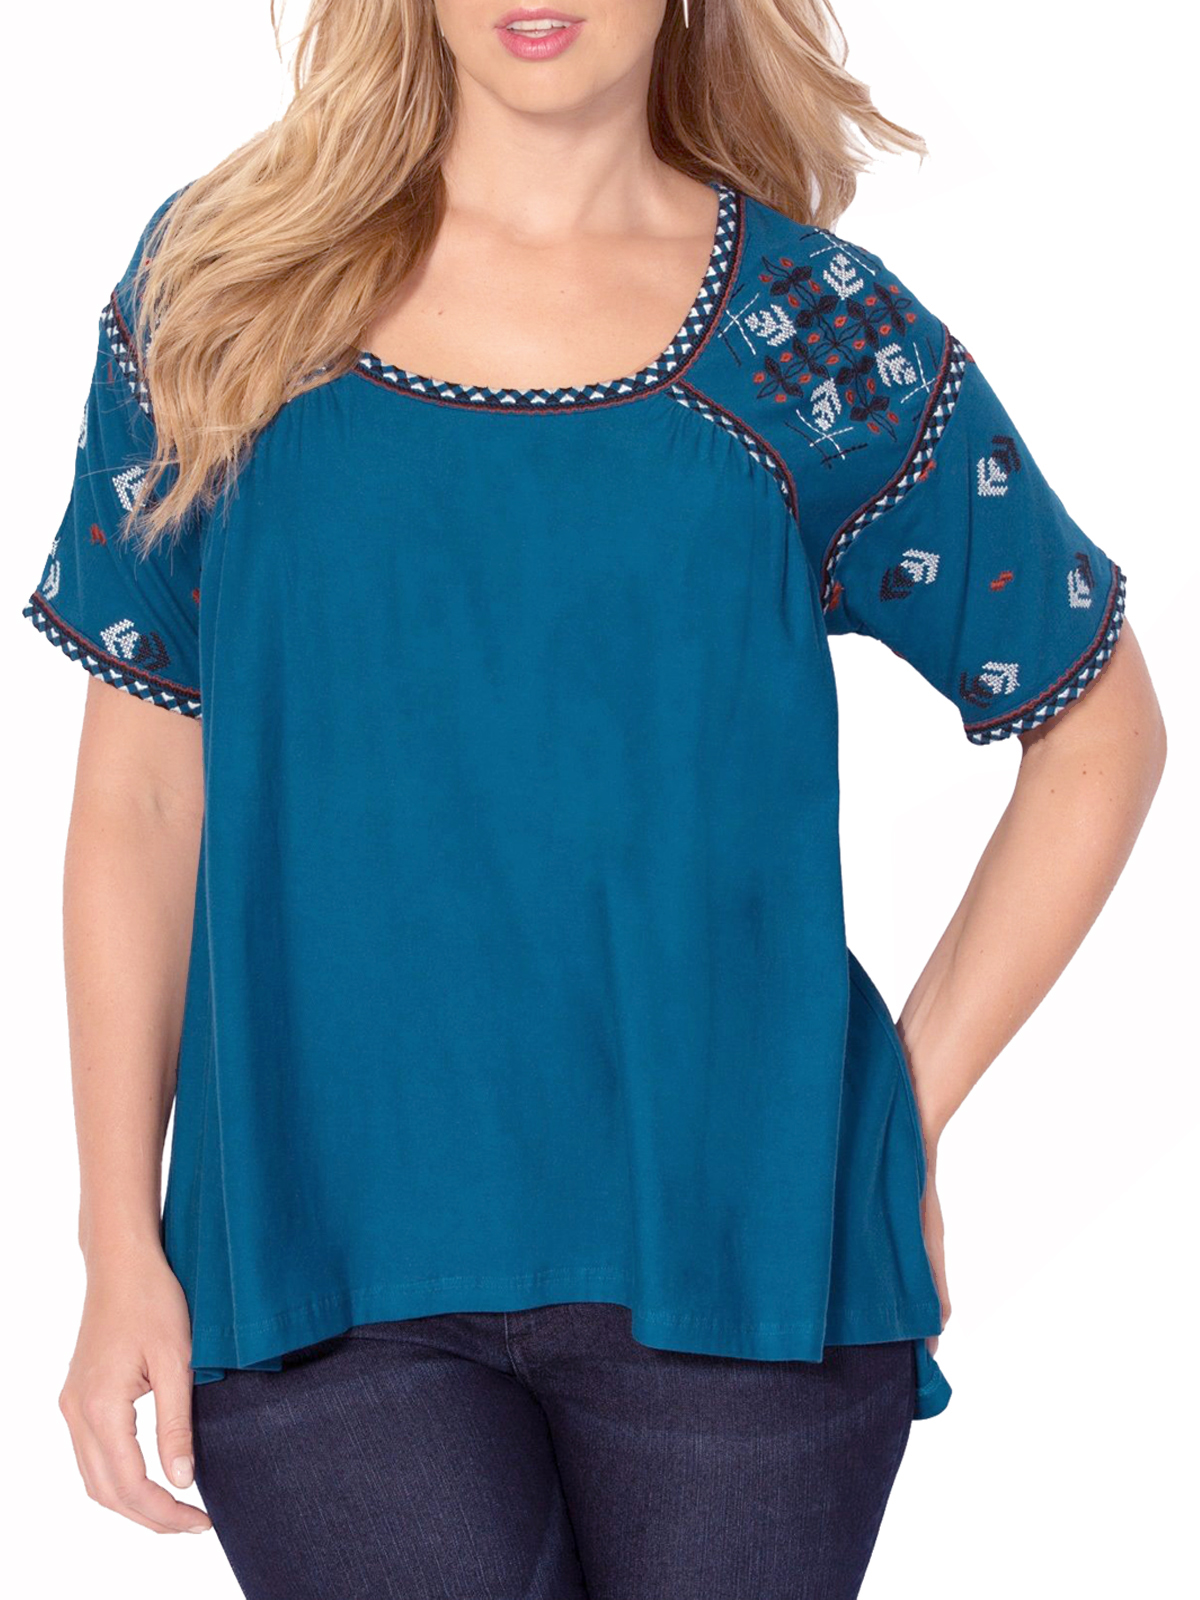 Roaman's - - Roamans TEAL Embroidered Peasant Tee - Size 14/16 to 34/36 ...